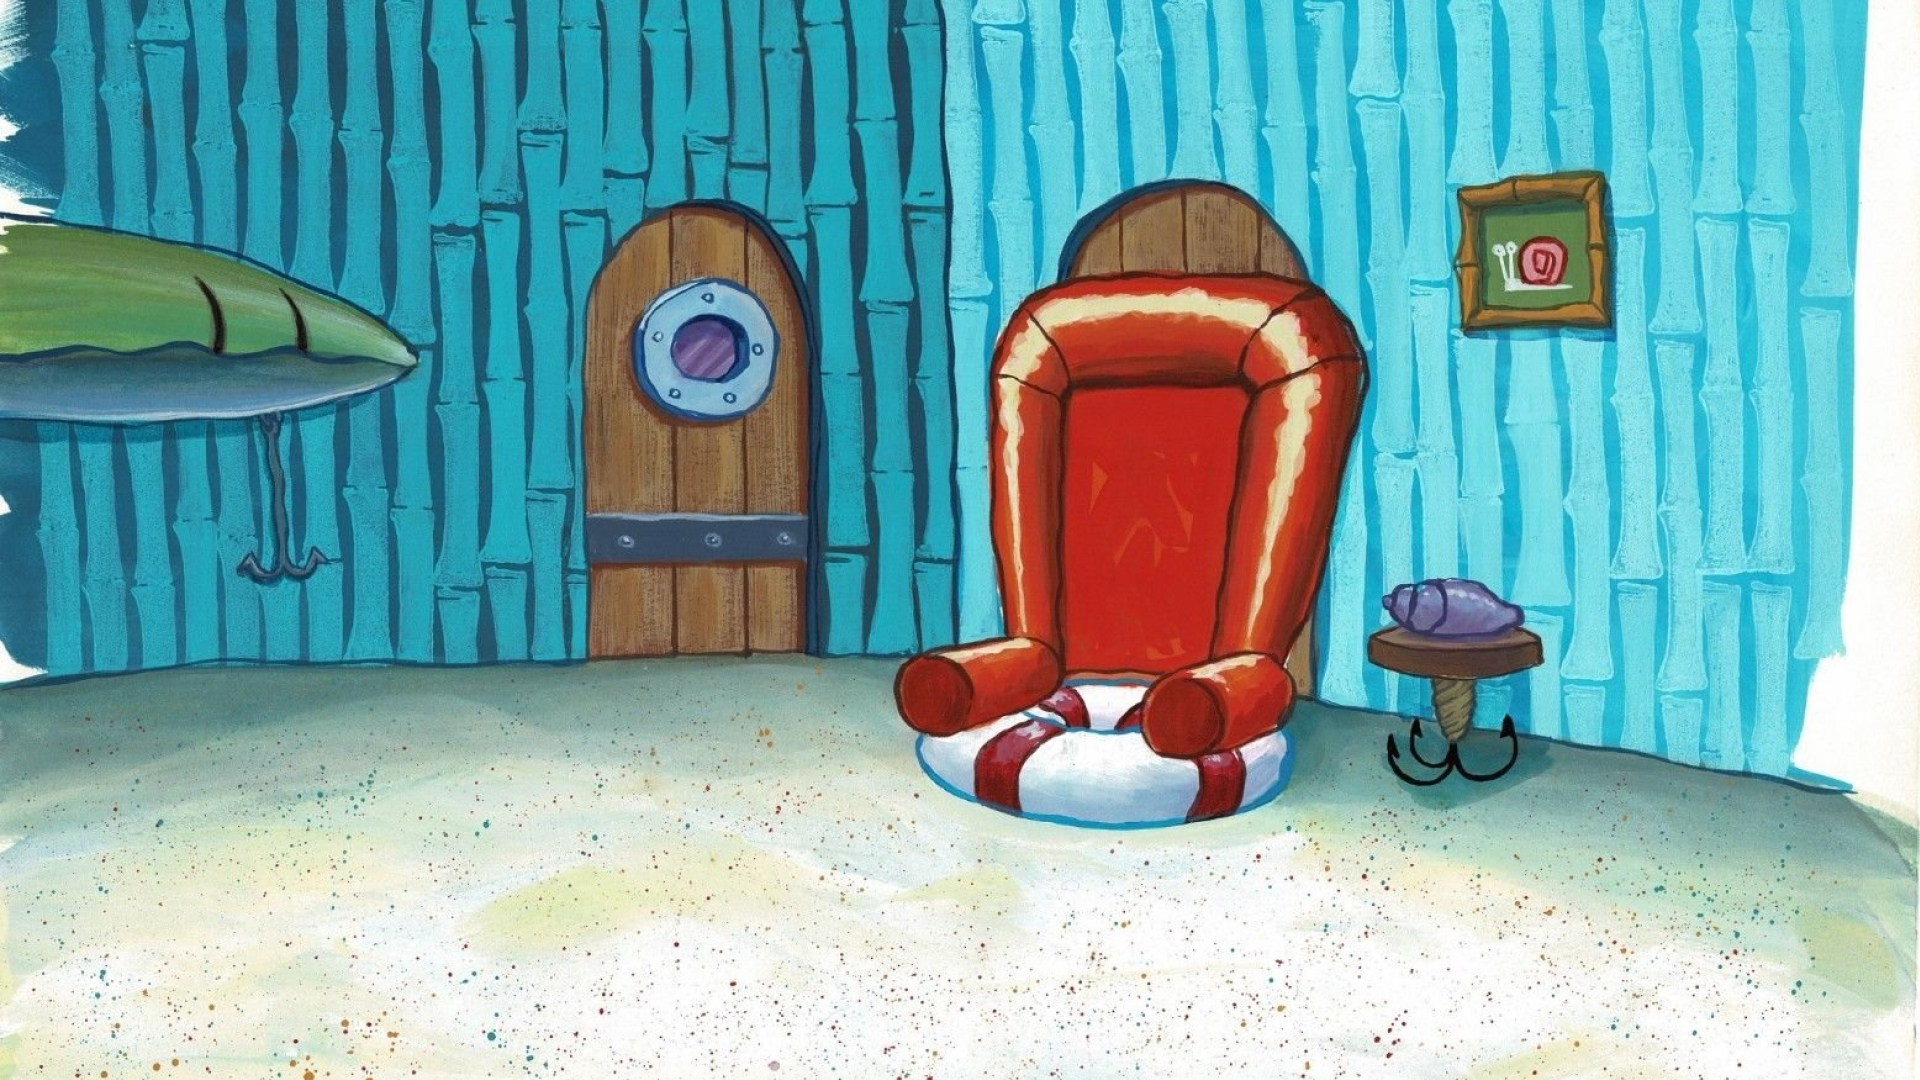 SpongeBob's Big Red Chair in House - FineShare